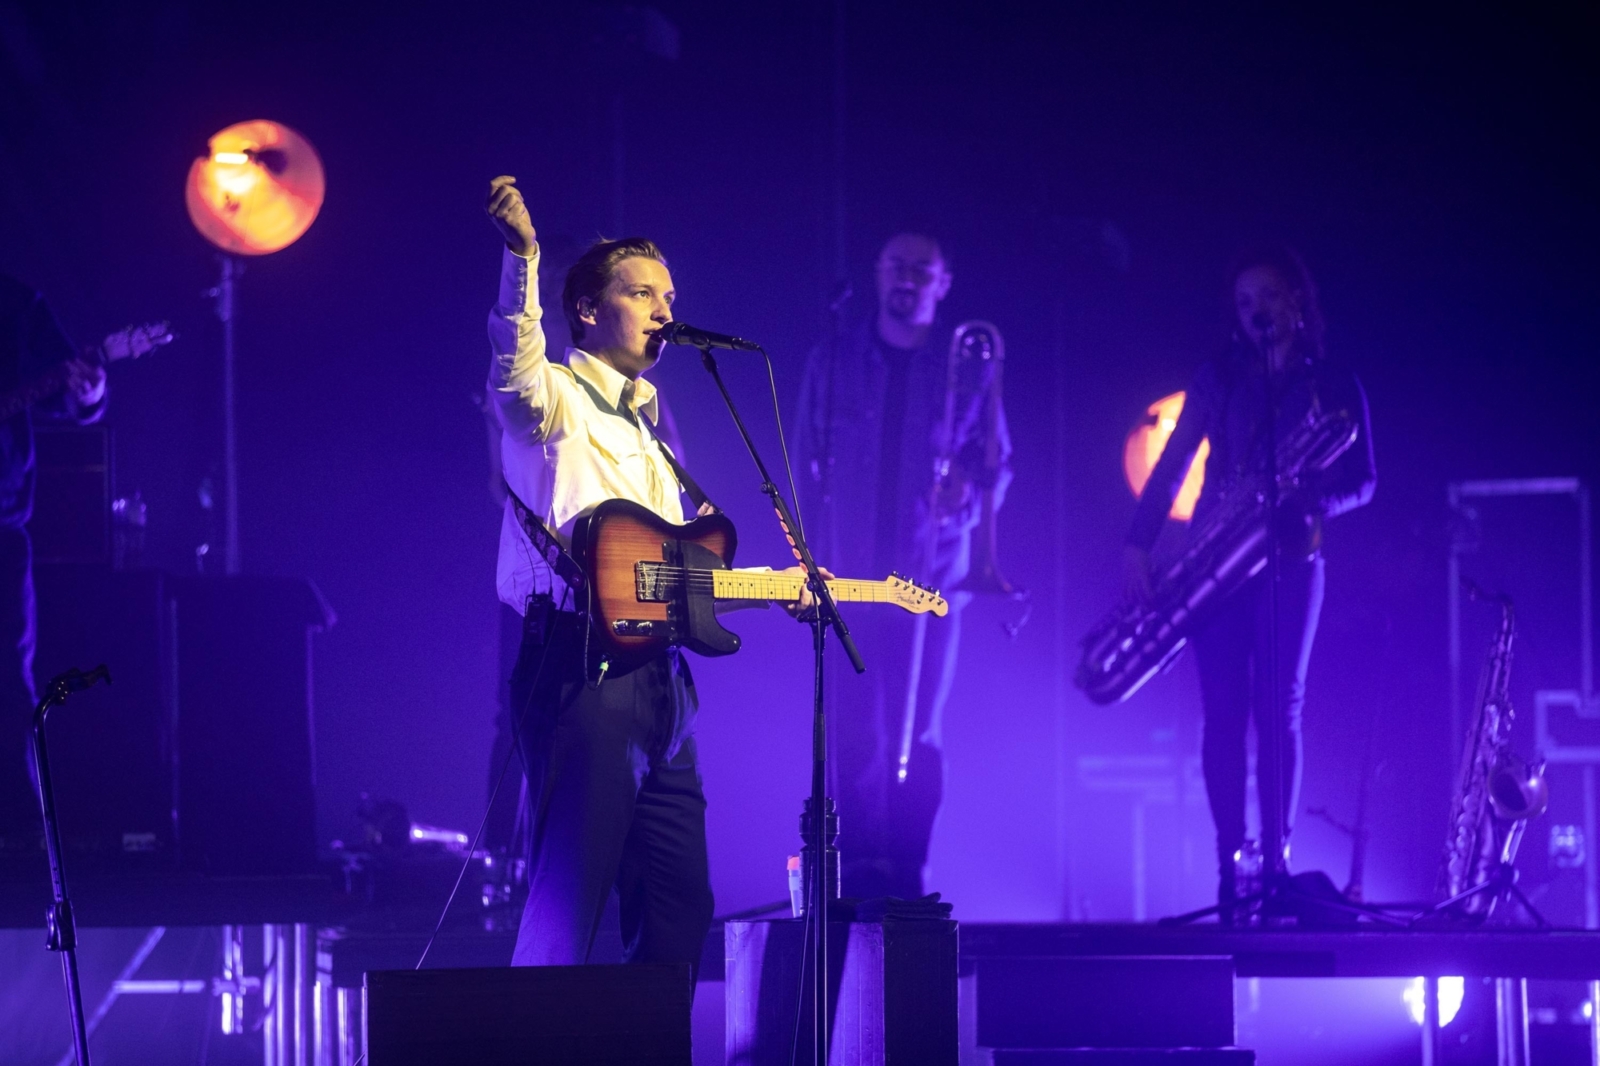 George Ezra continues his reign as the king of pop'n'roll at his comeback London show